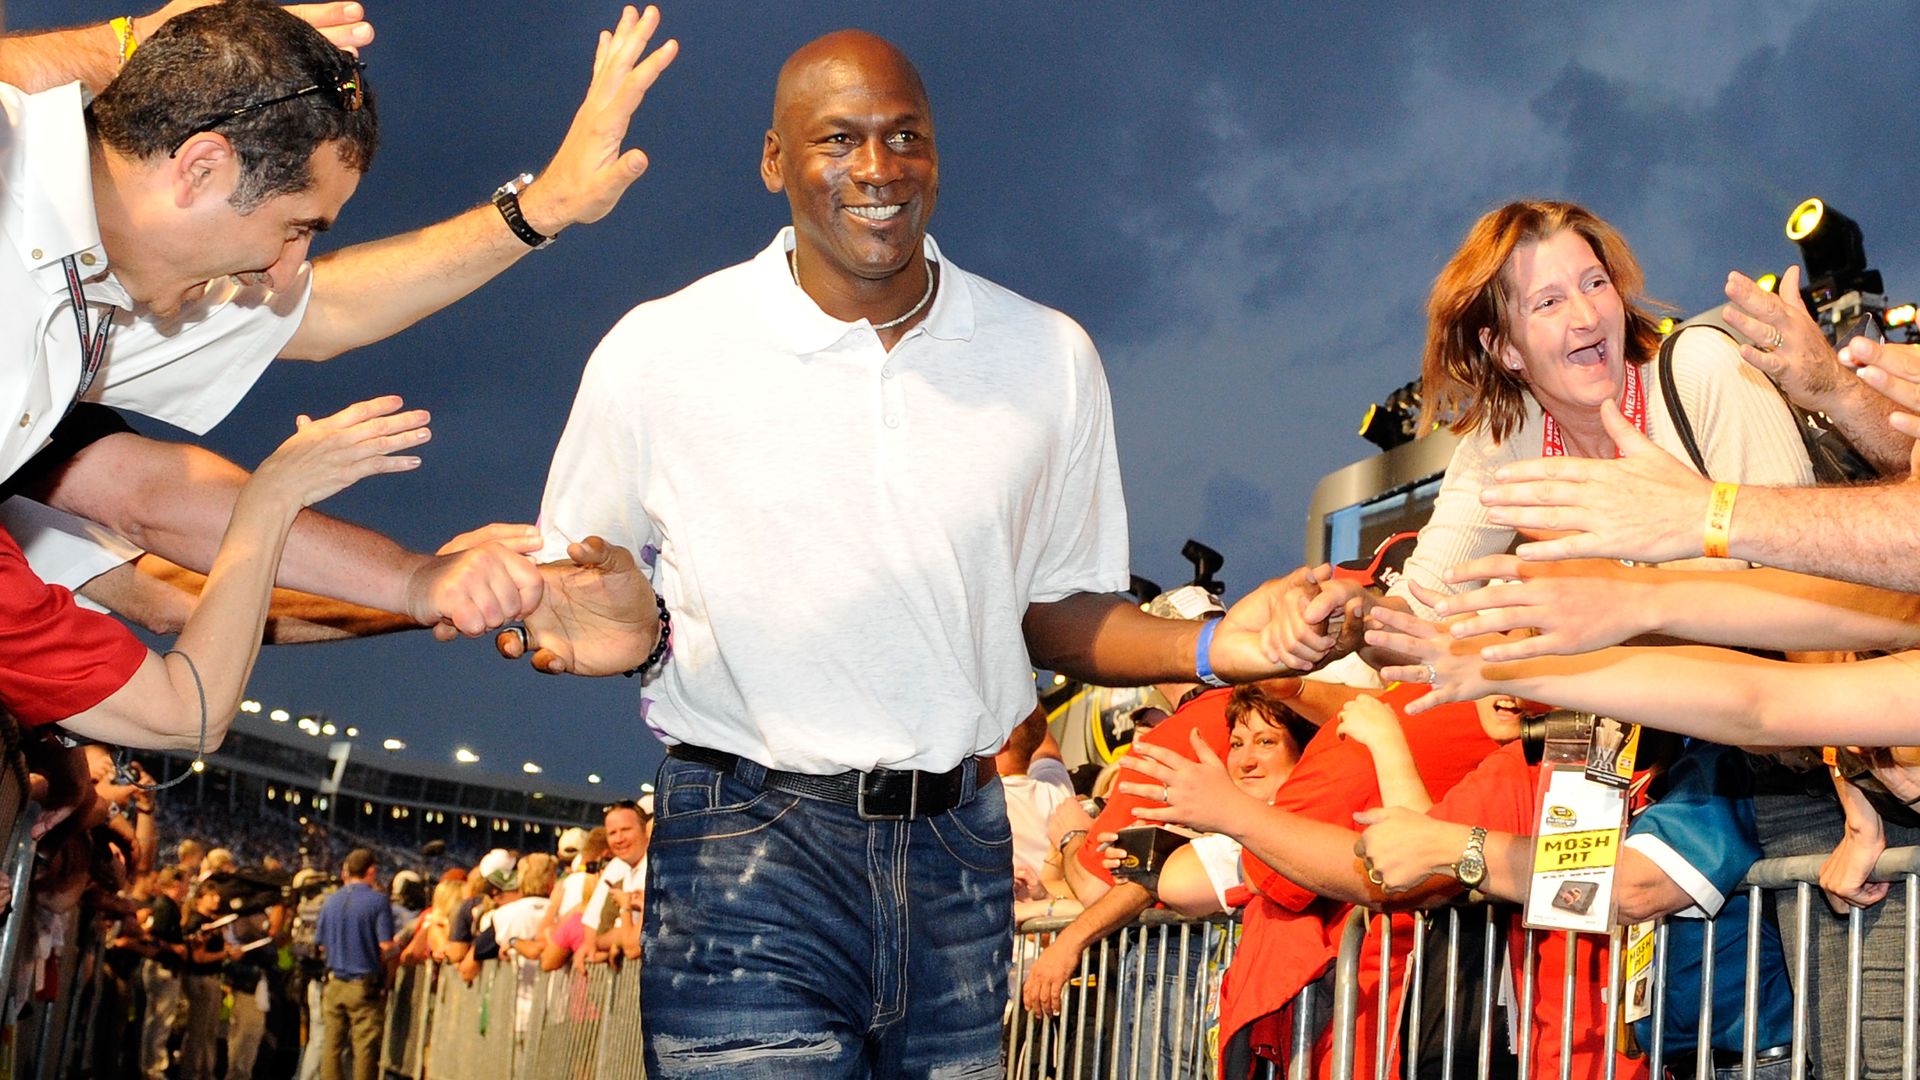 Chicago Bulls star Michael Jordan high-fives the crowd during pre-race ceremonies prior to the start of the NASCAR Sprint All-Star Race at Charlotte Motor Speedway on May 22, 2010 in Concord, North Carolina